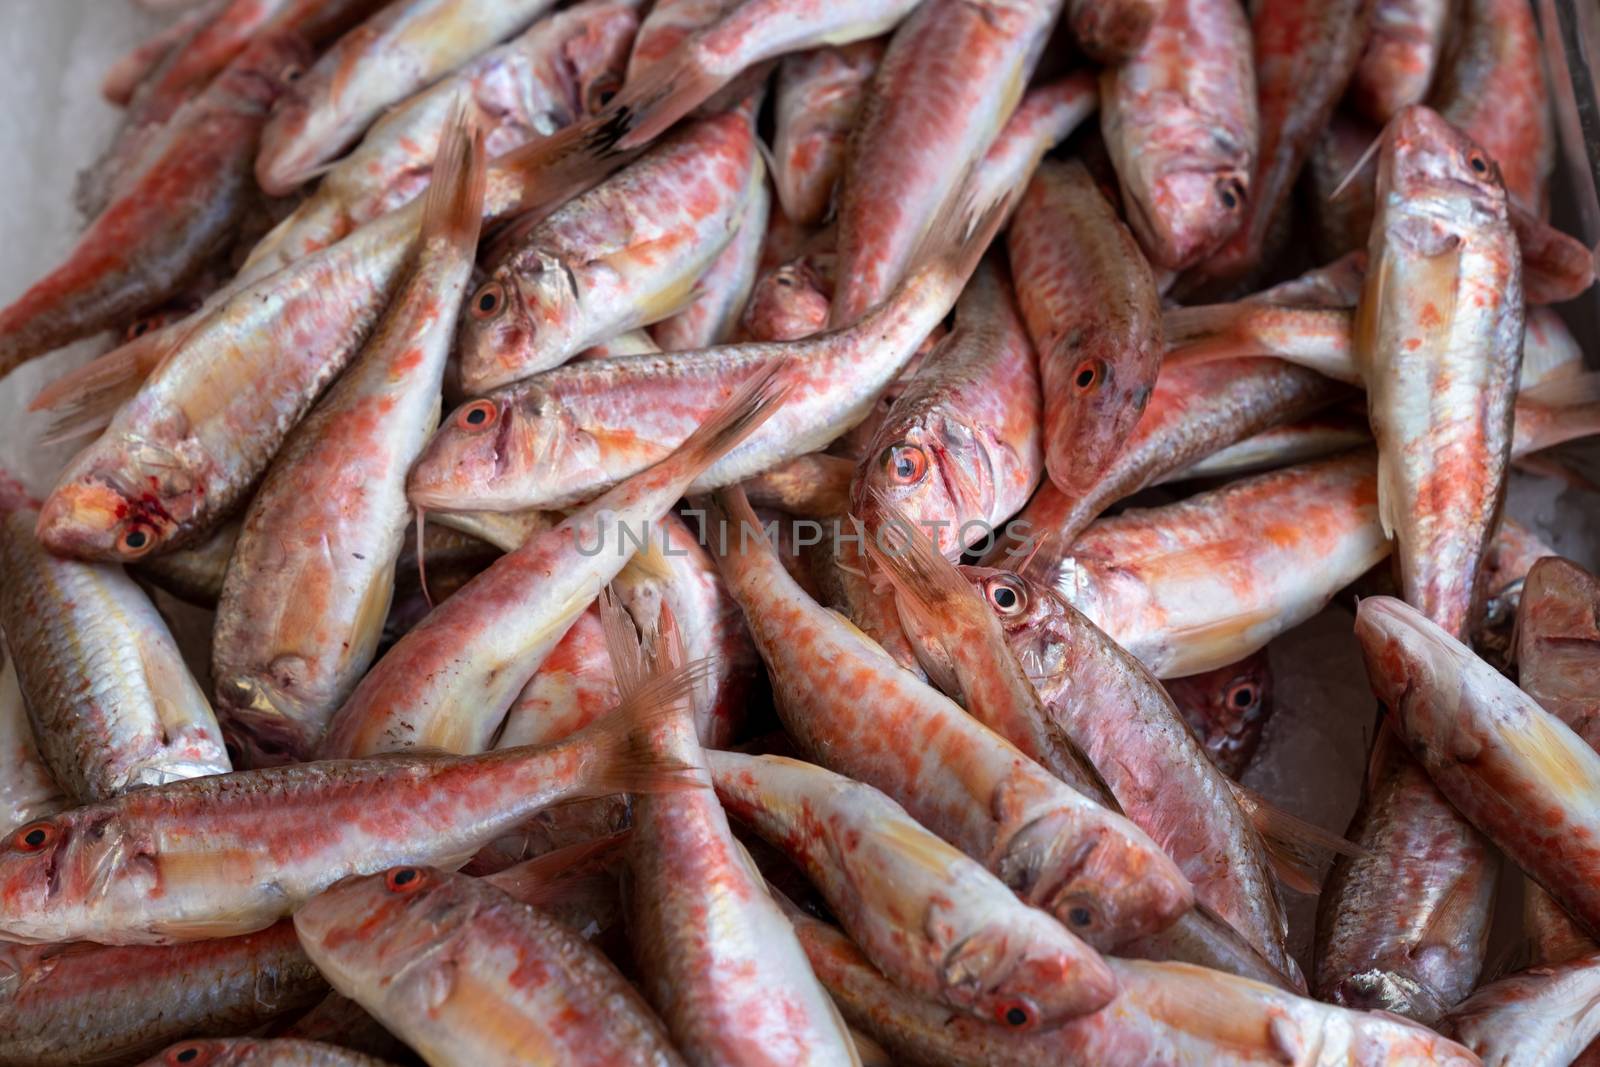 Red mullet stowed on ice at the market by Robertobinetti70